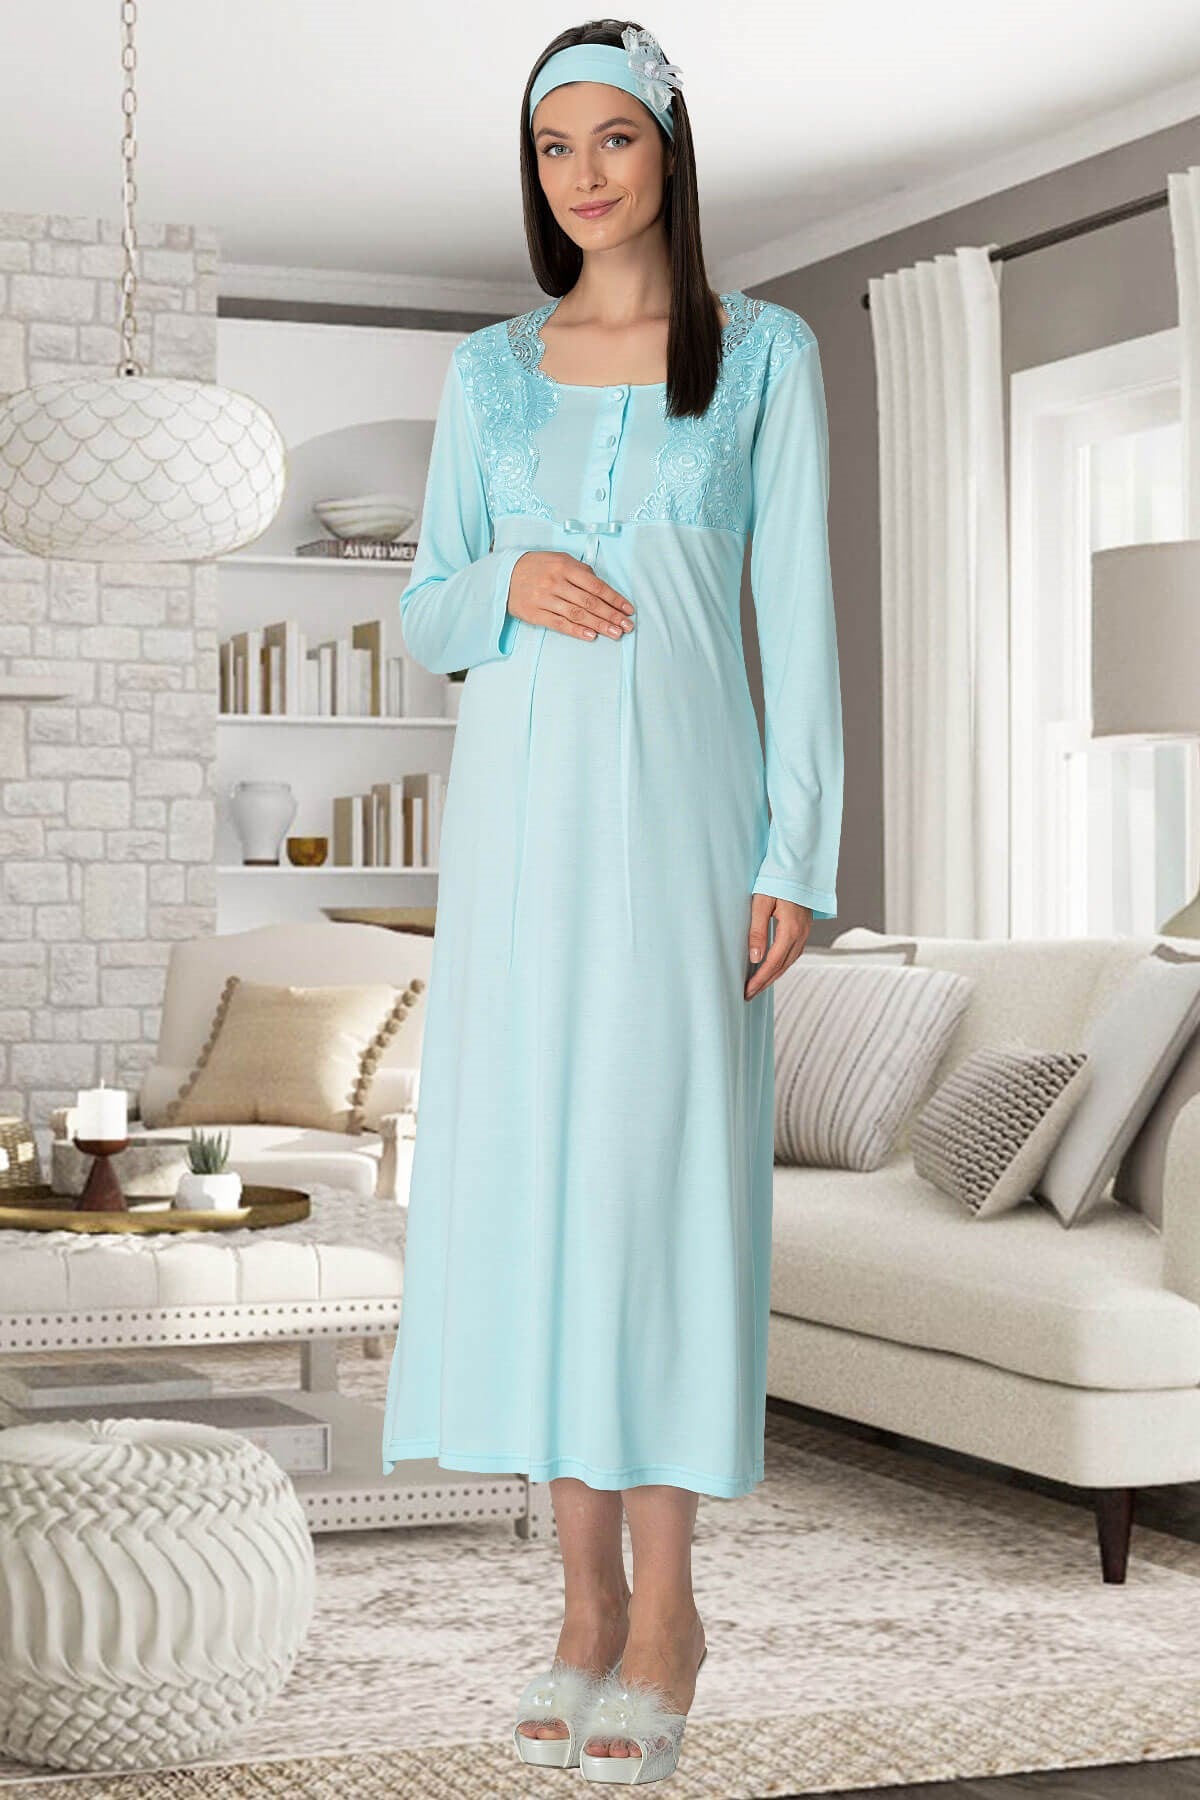 Shopymommy 5343 Lace Collar Maternity & Nursing Nightgown Turquoise